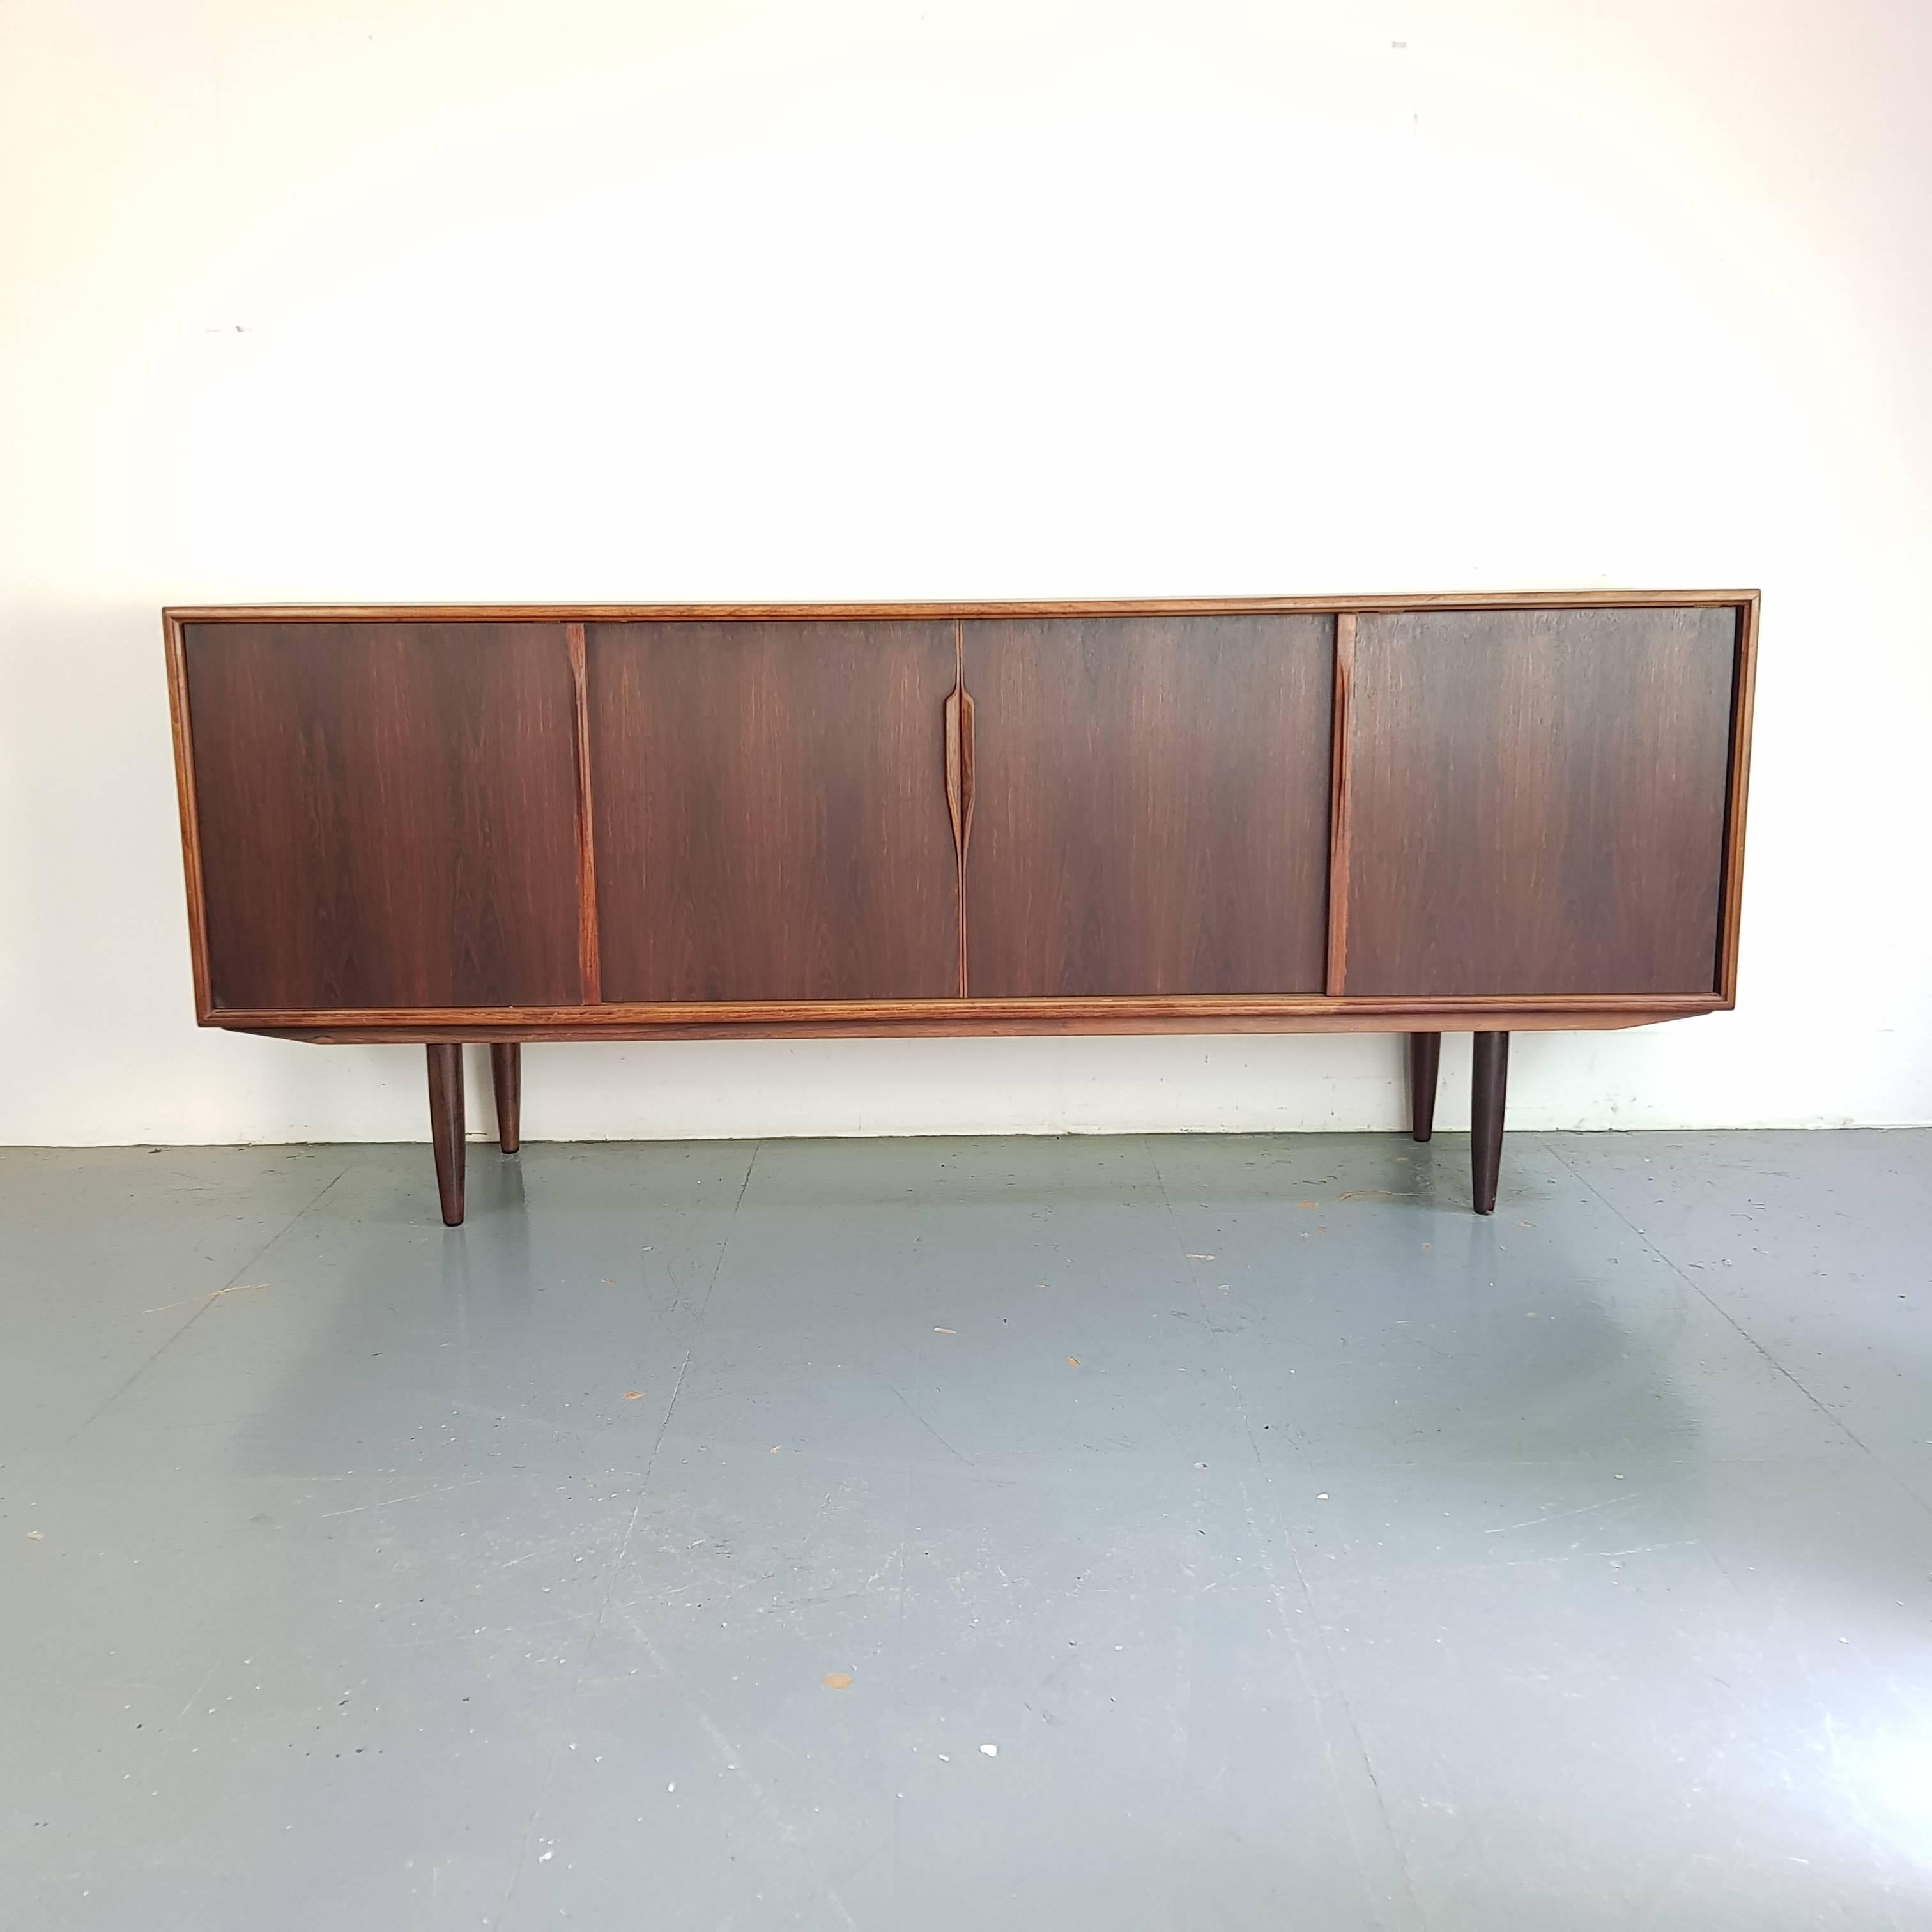 Lovely midcentury Danish sideboard designed by Gunni Omann in rosewood.

Approximate dimensions:

Width: 201cm

Depth: 47cm

Height: 83cm

Drawers: 45cm x 37cm x 5cm
Middle: 93cm x 41cm x 50cm (25cm twice)
Left: 53cm x 41cm x 50cm (25cm